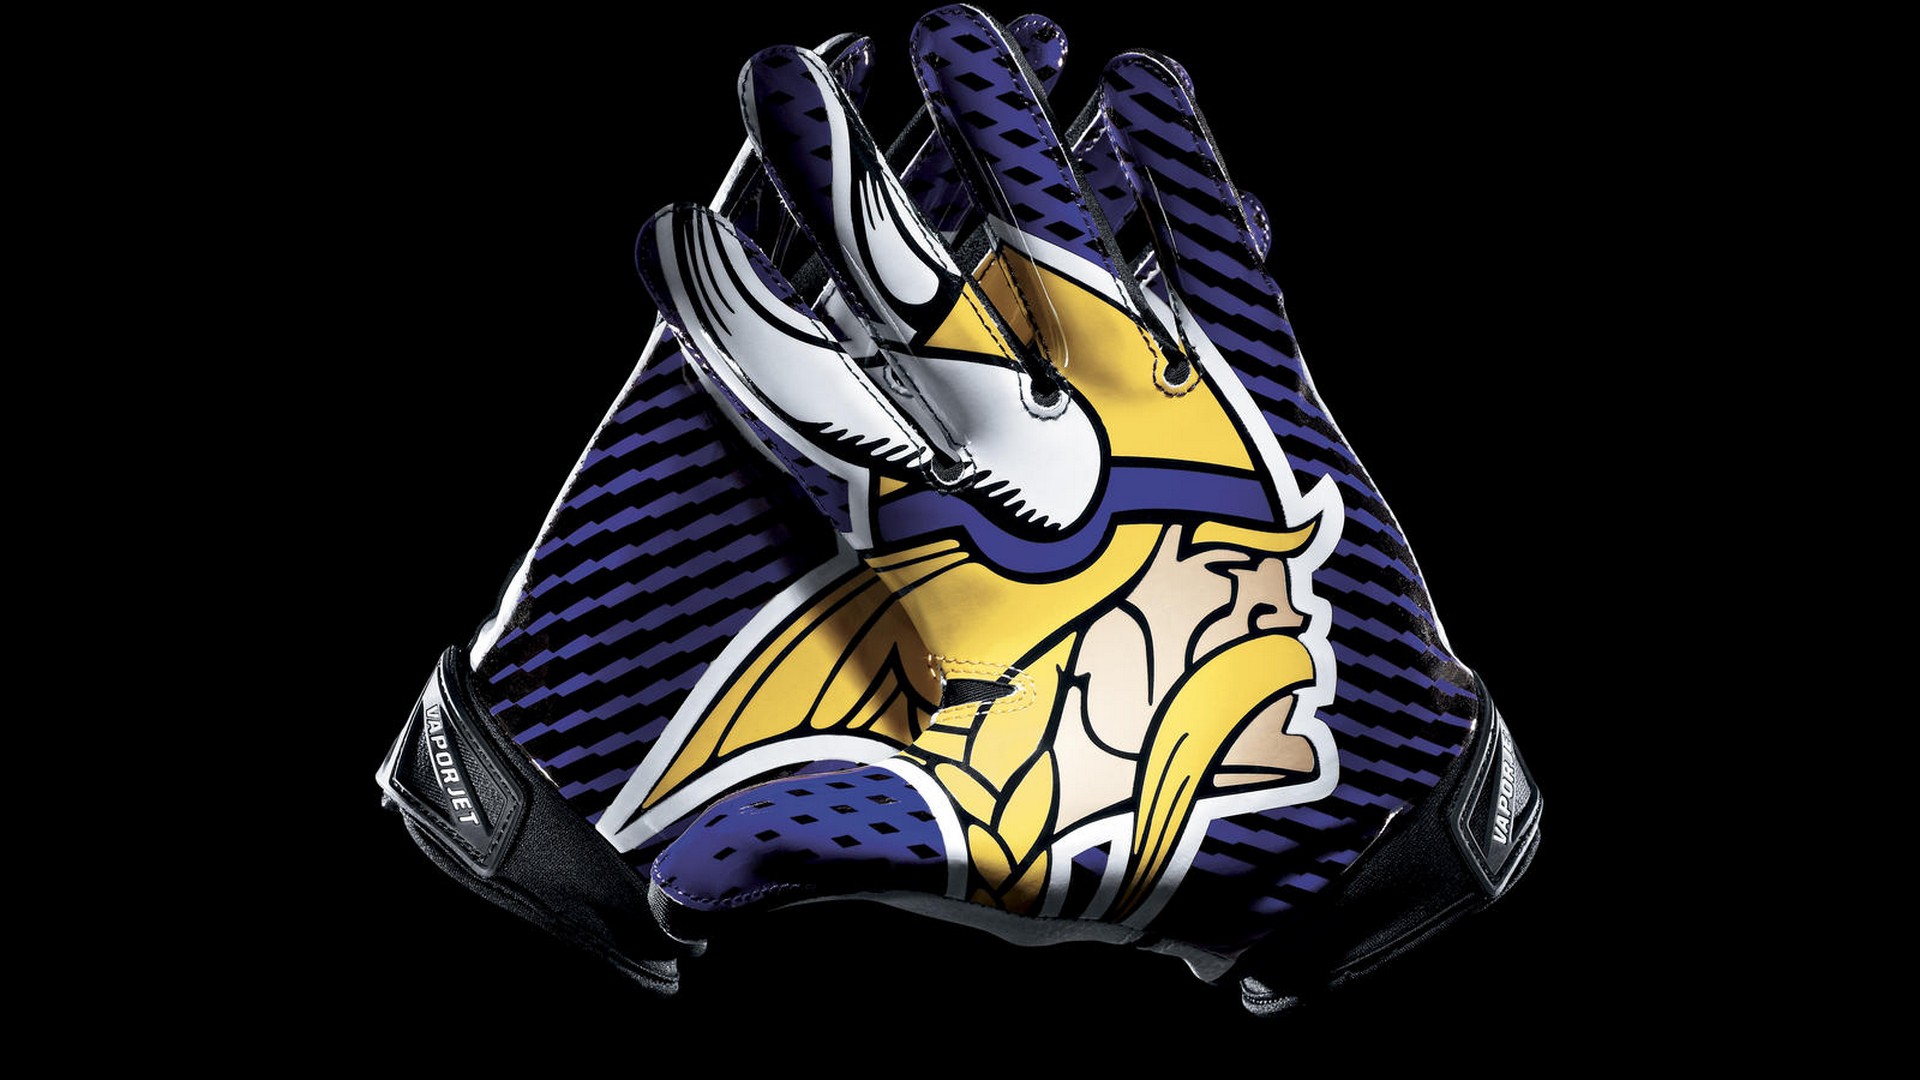 Wallpapers HD Minnesota Vikings with resolution 1920x1080 pixel. You can make this wallpaper for your Mac or Windows Desktop Background, iPhone, Android or Tablet and another Smartphone device